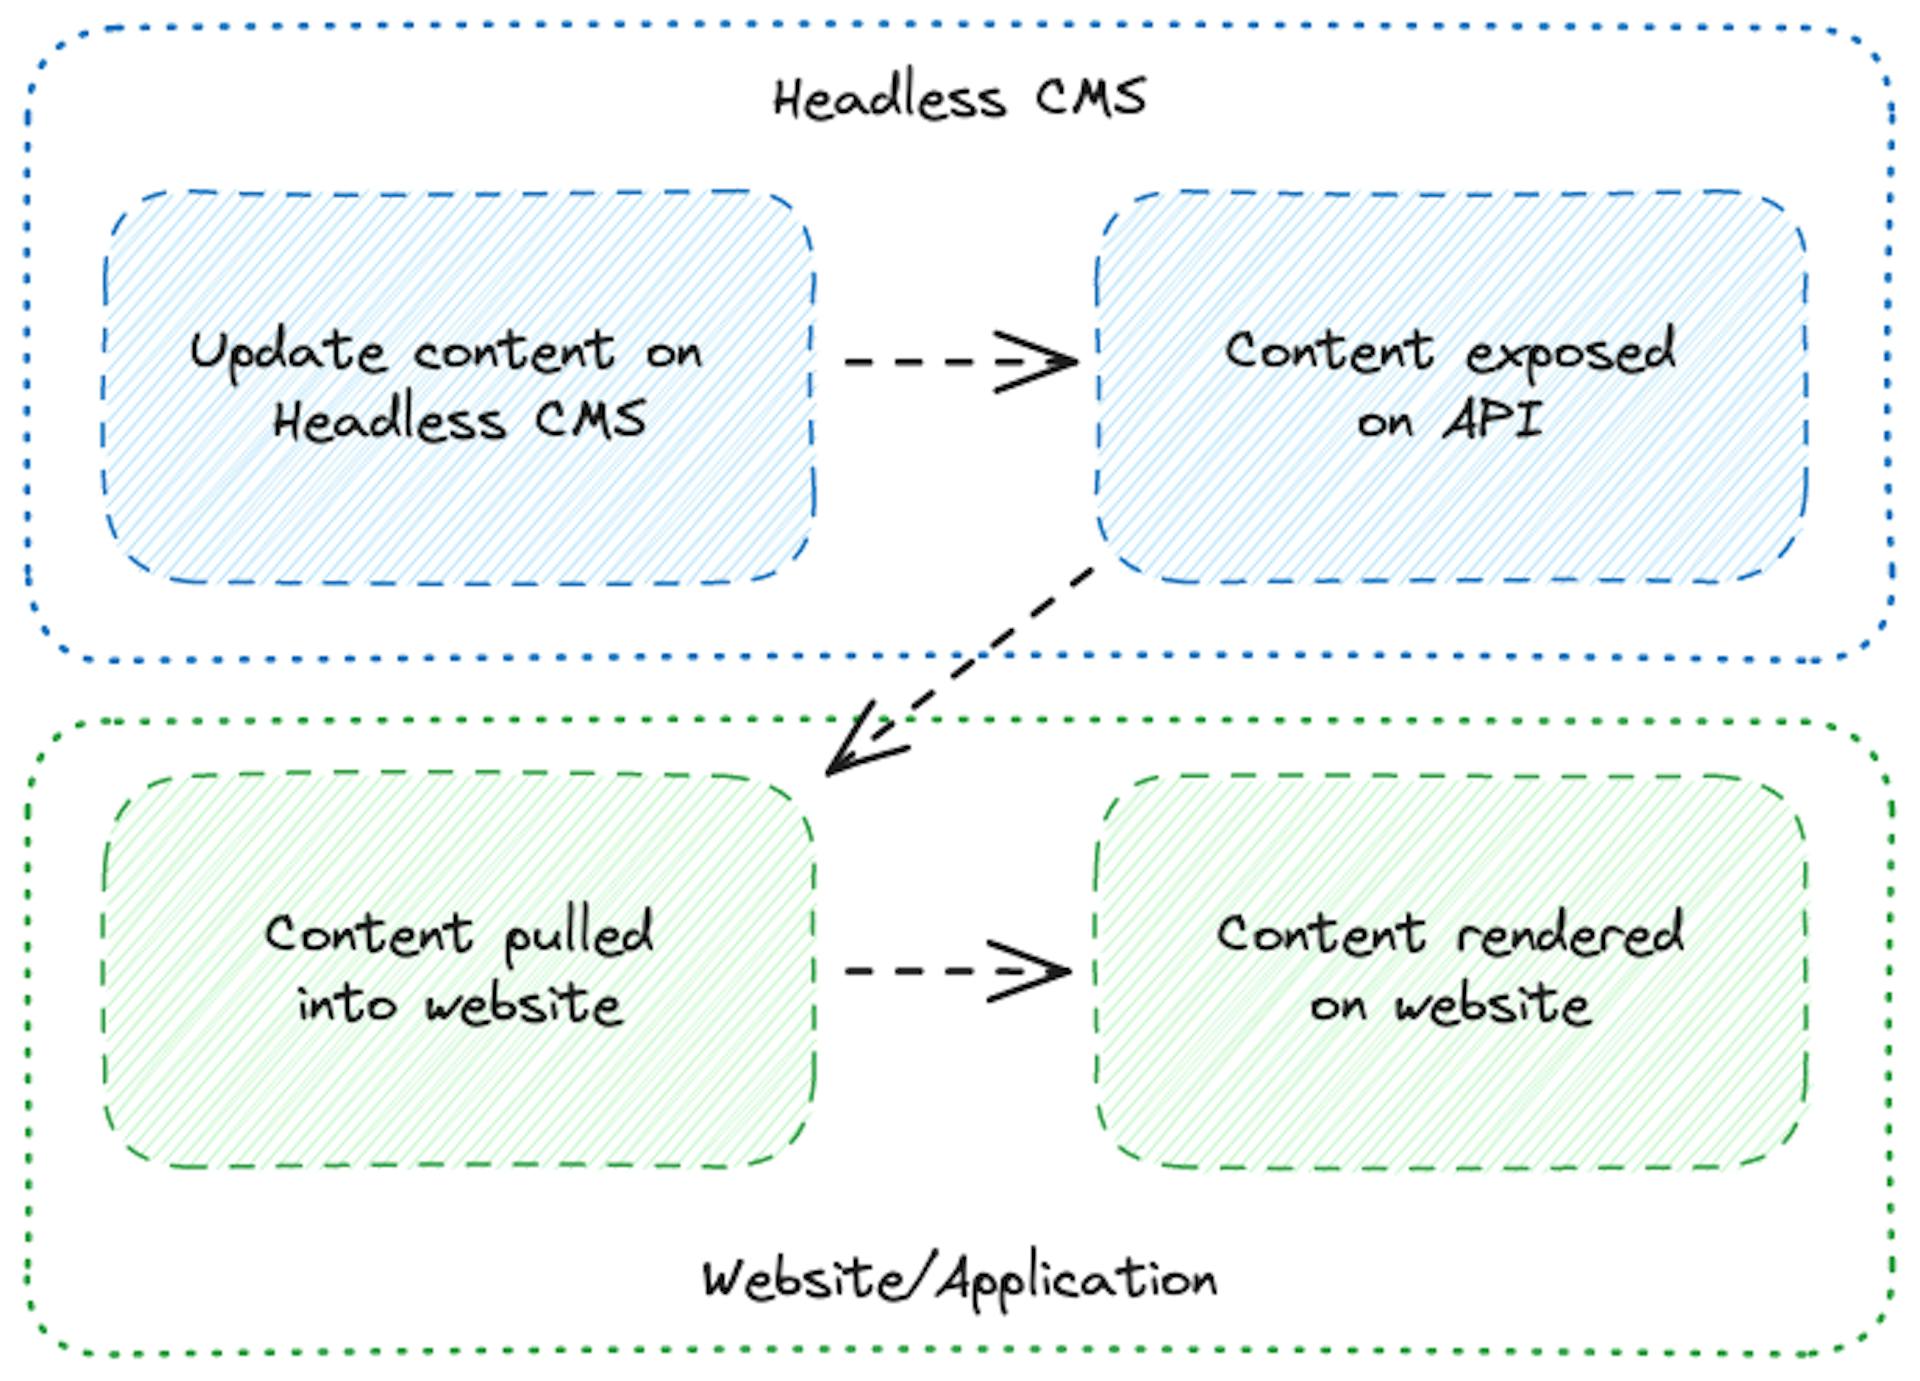 An image showing how a React CMS works.